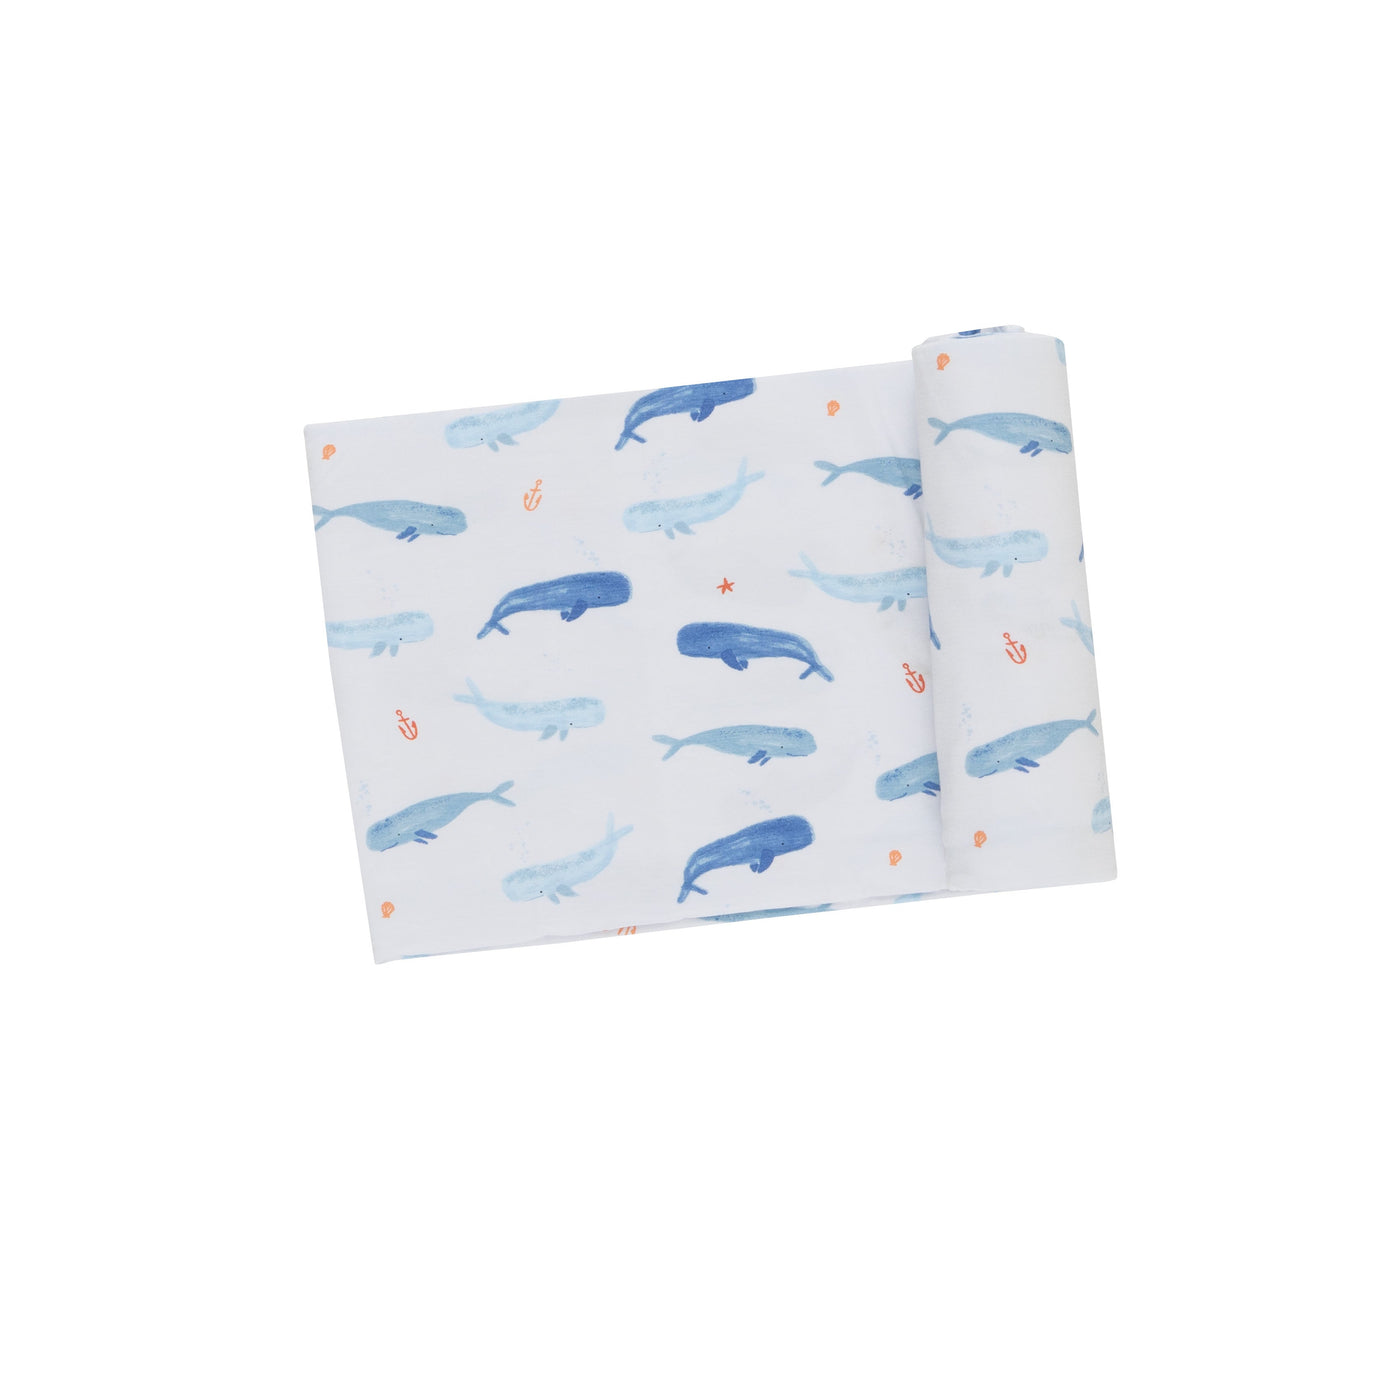 Swaddle Blanket - Whale Hello There - Angel Dear